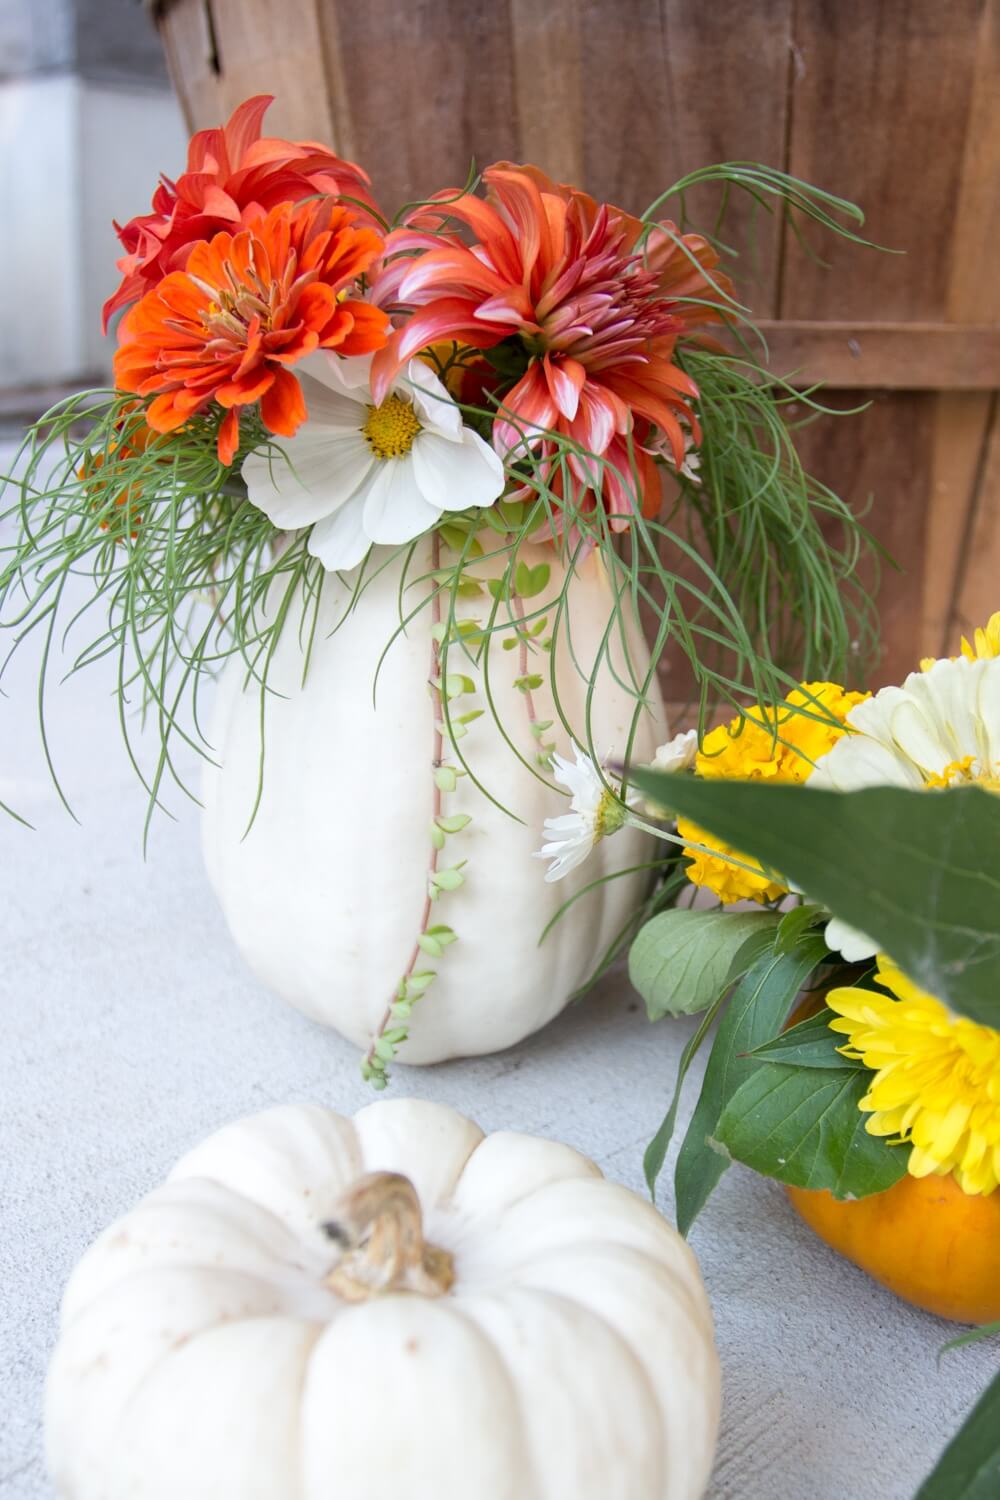 These gorgeous mini pumpkin vases are the perfect way to display fresh flowers for fall or a unique Thanksgiving centerpiece.